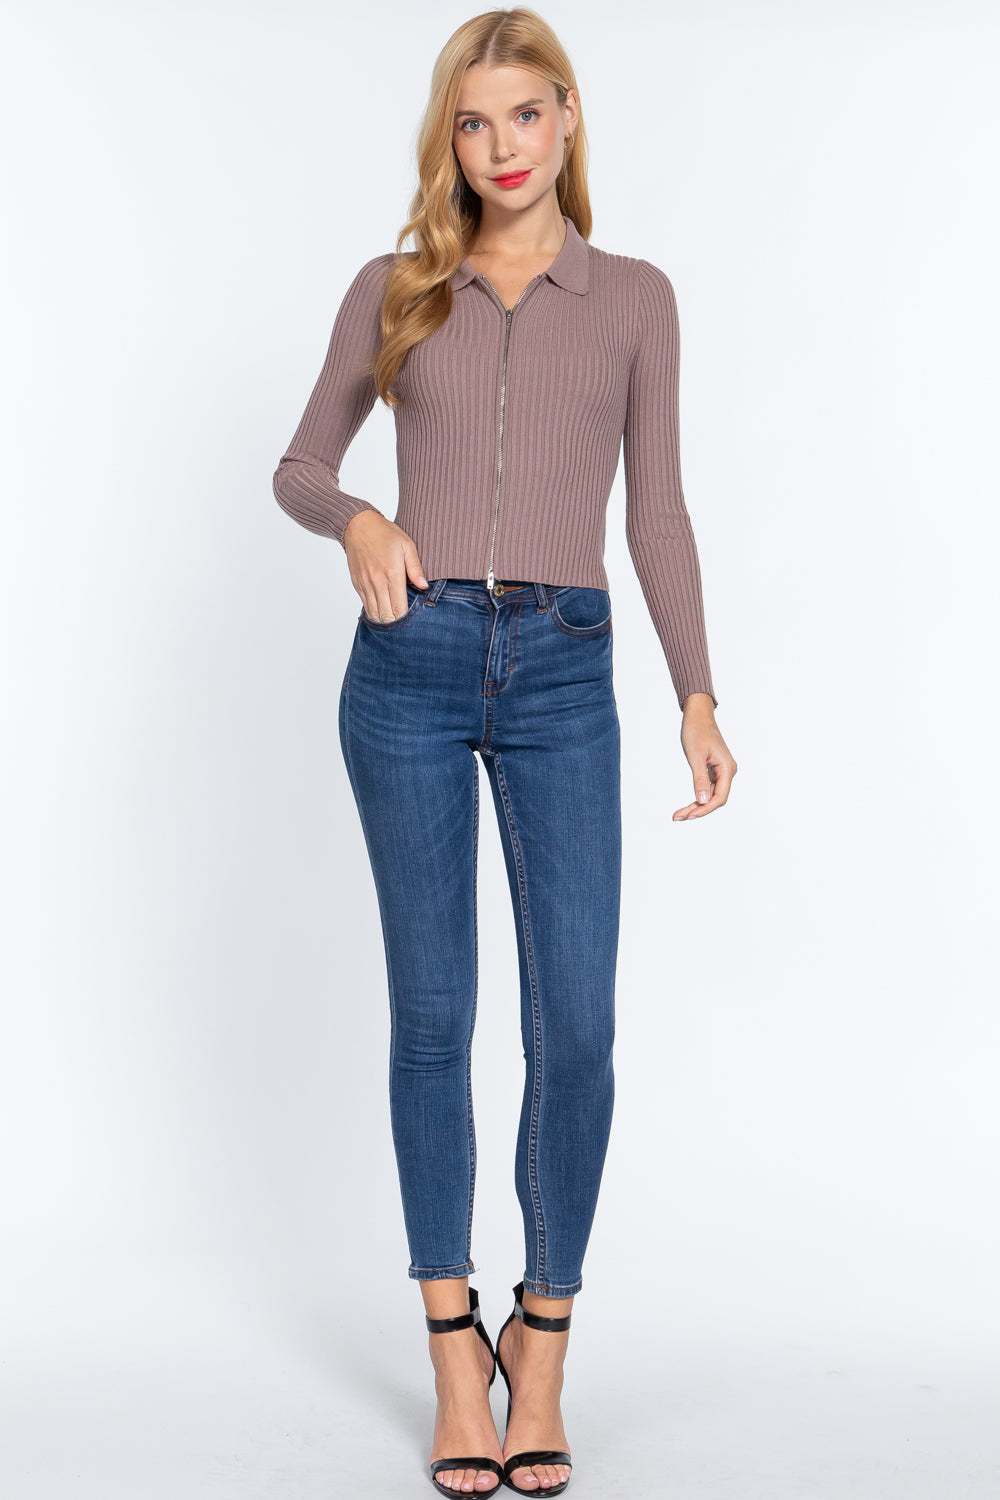 Dusk Mauve Notched Collar Front Zip Long Sleeve Slim Fit Stretchy Knit Sweater Top Shirts & Tops jehouze 